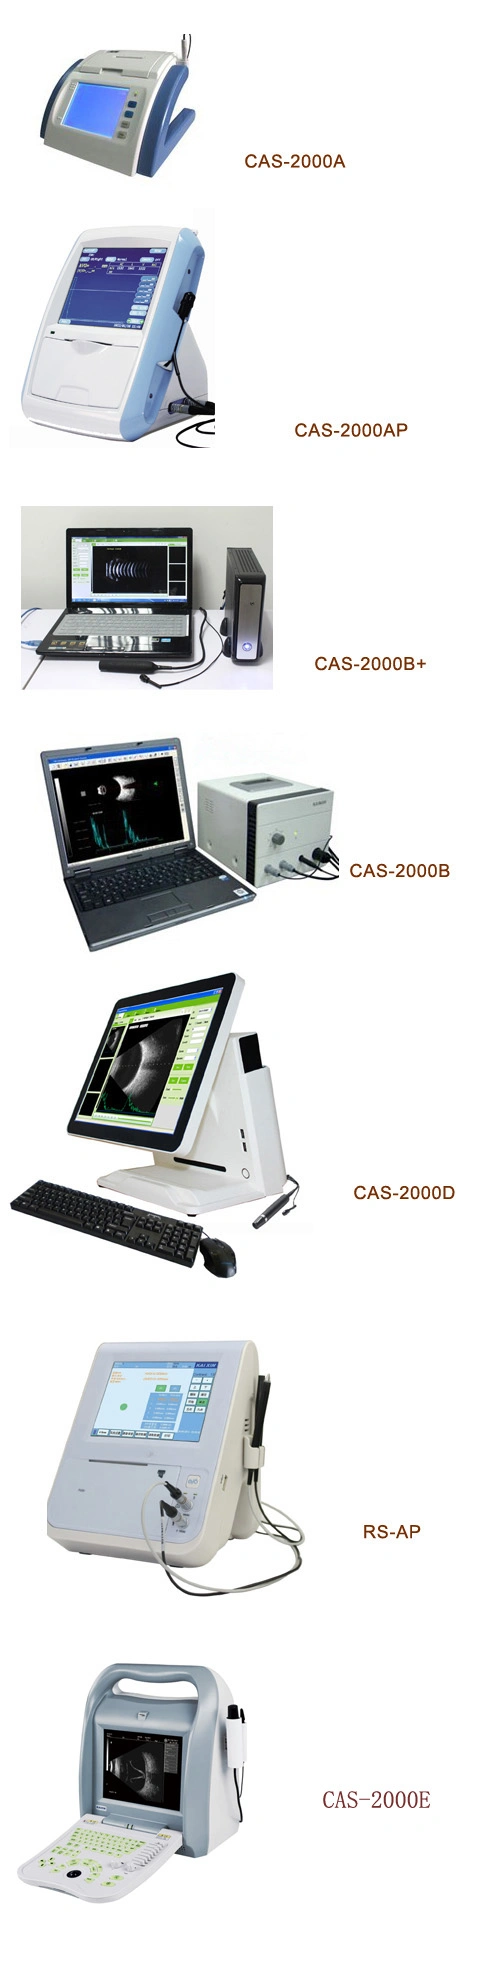 CAS-2000b Top Quality Ophthalmic Equipment China Ophthalmic Ab Scan